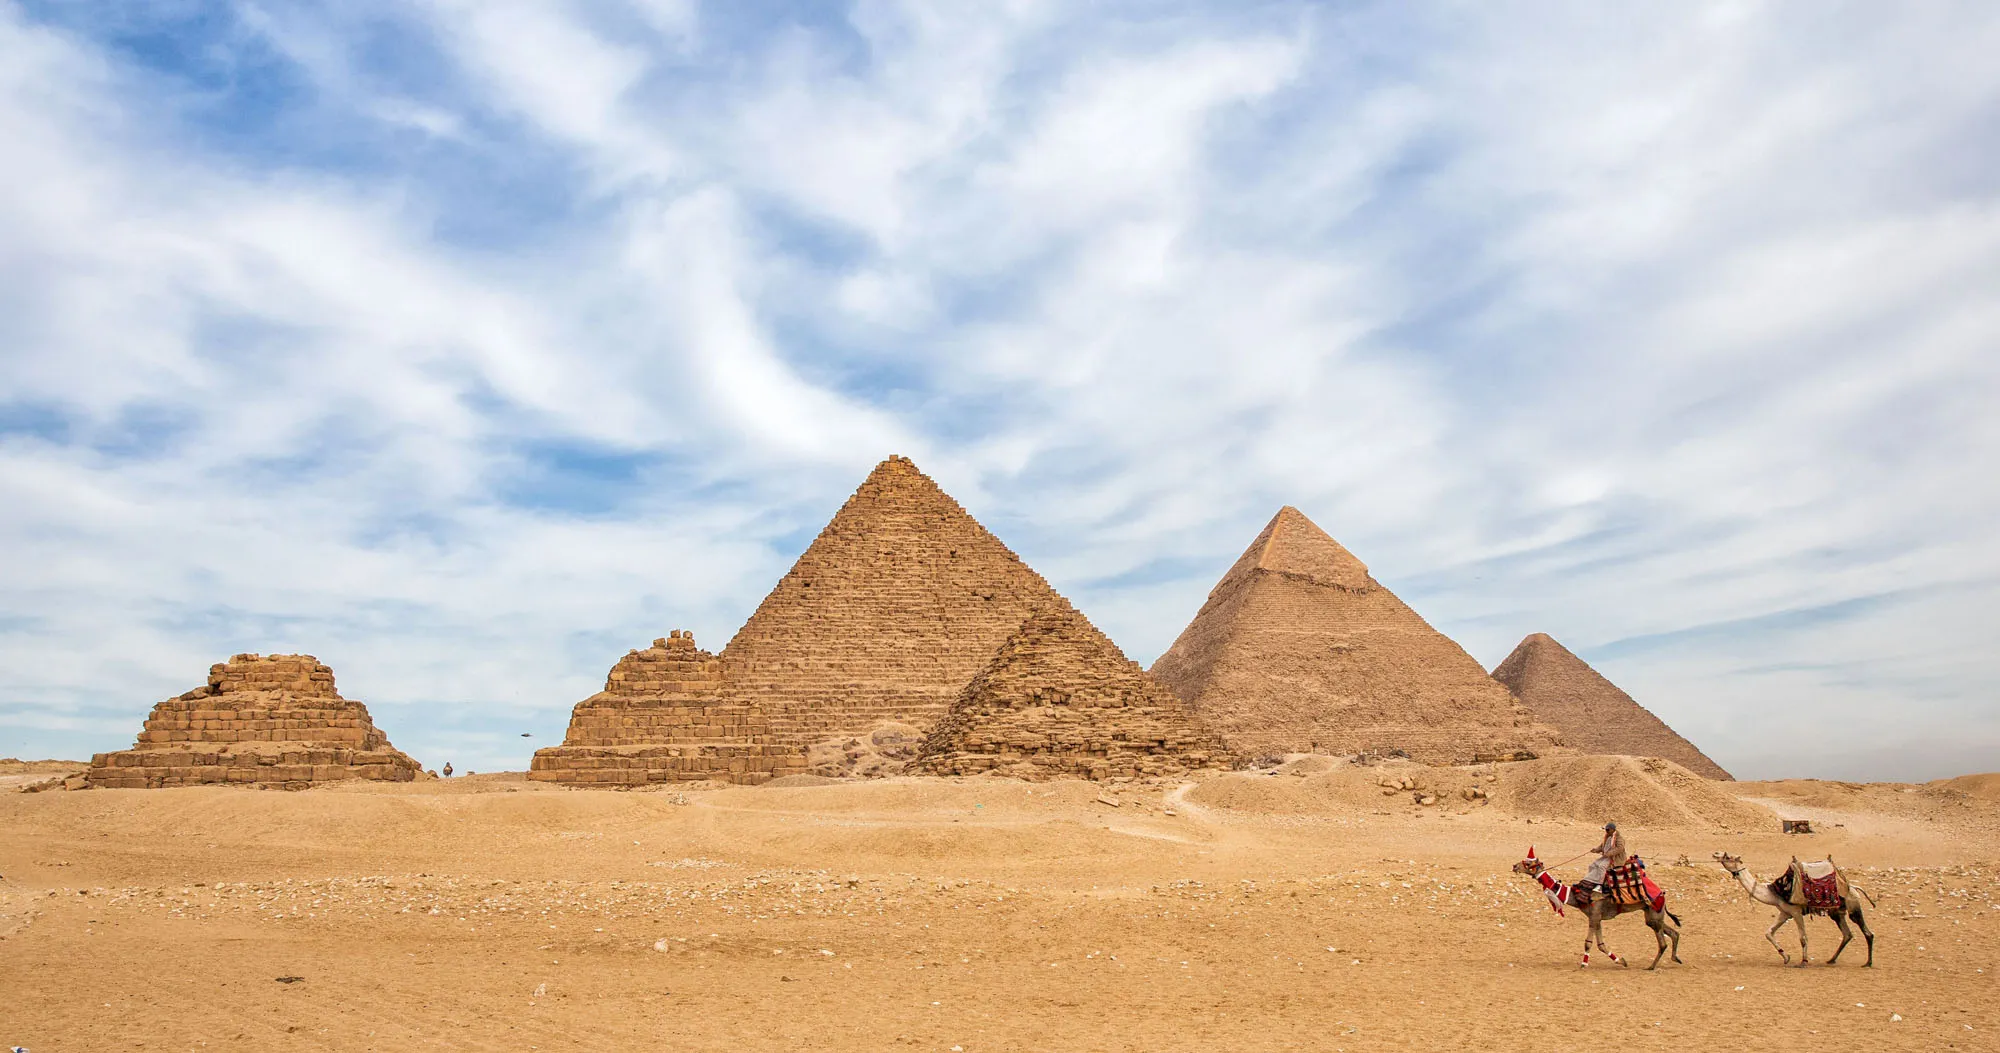 Featured image for “Where to Get the Best Views of the Pyramids of Giza”